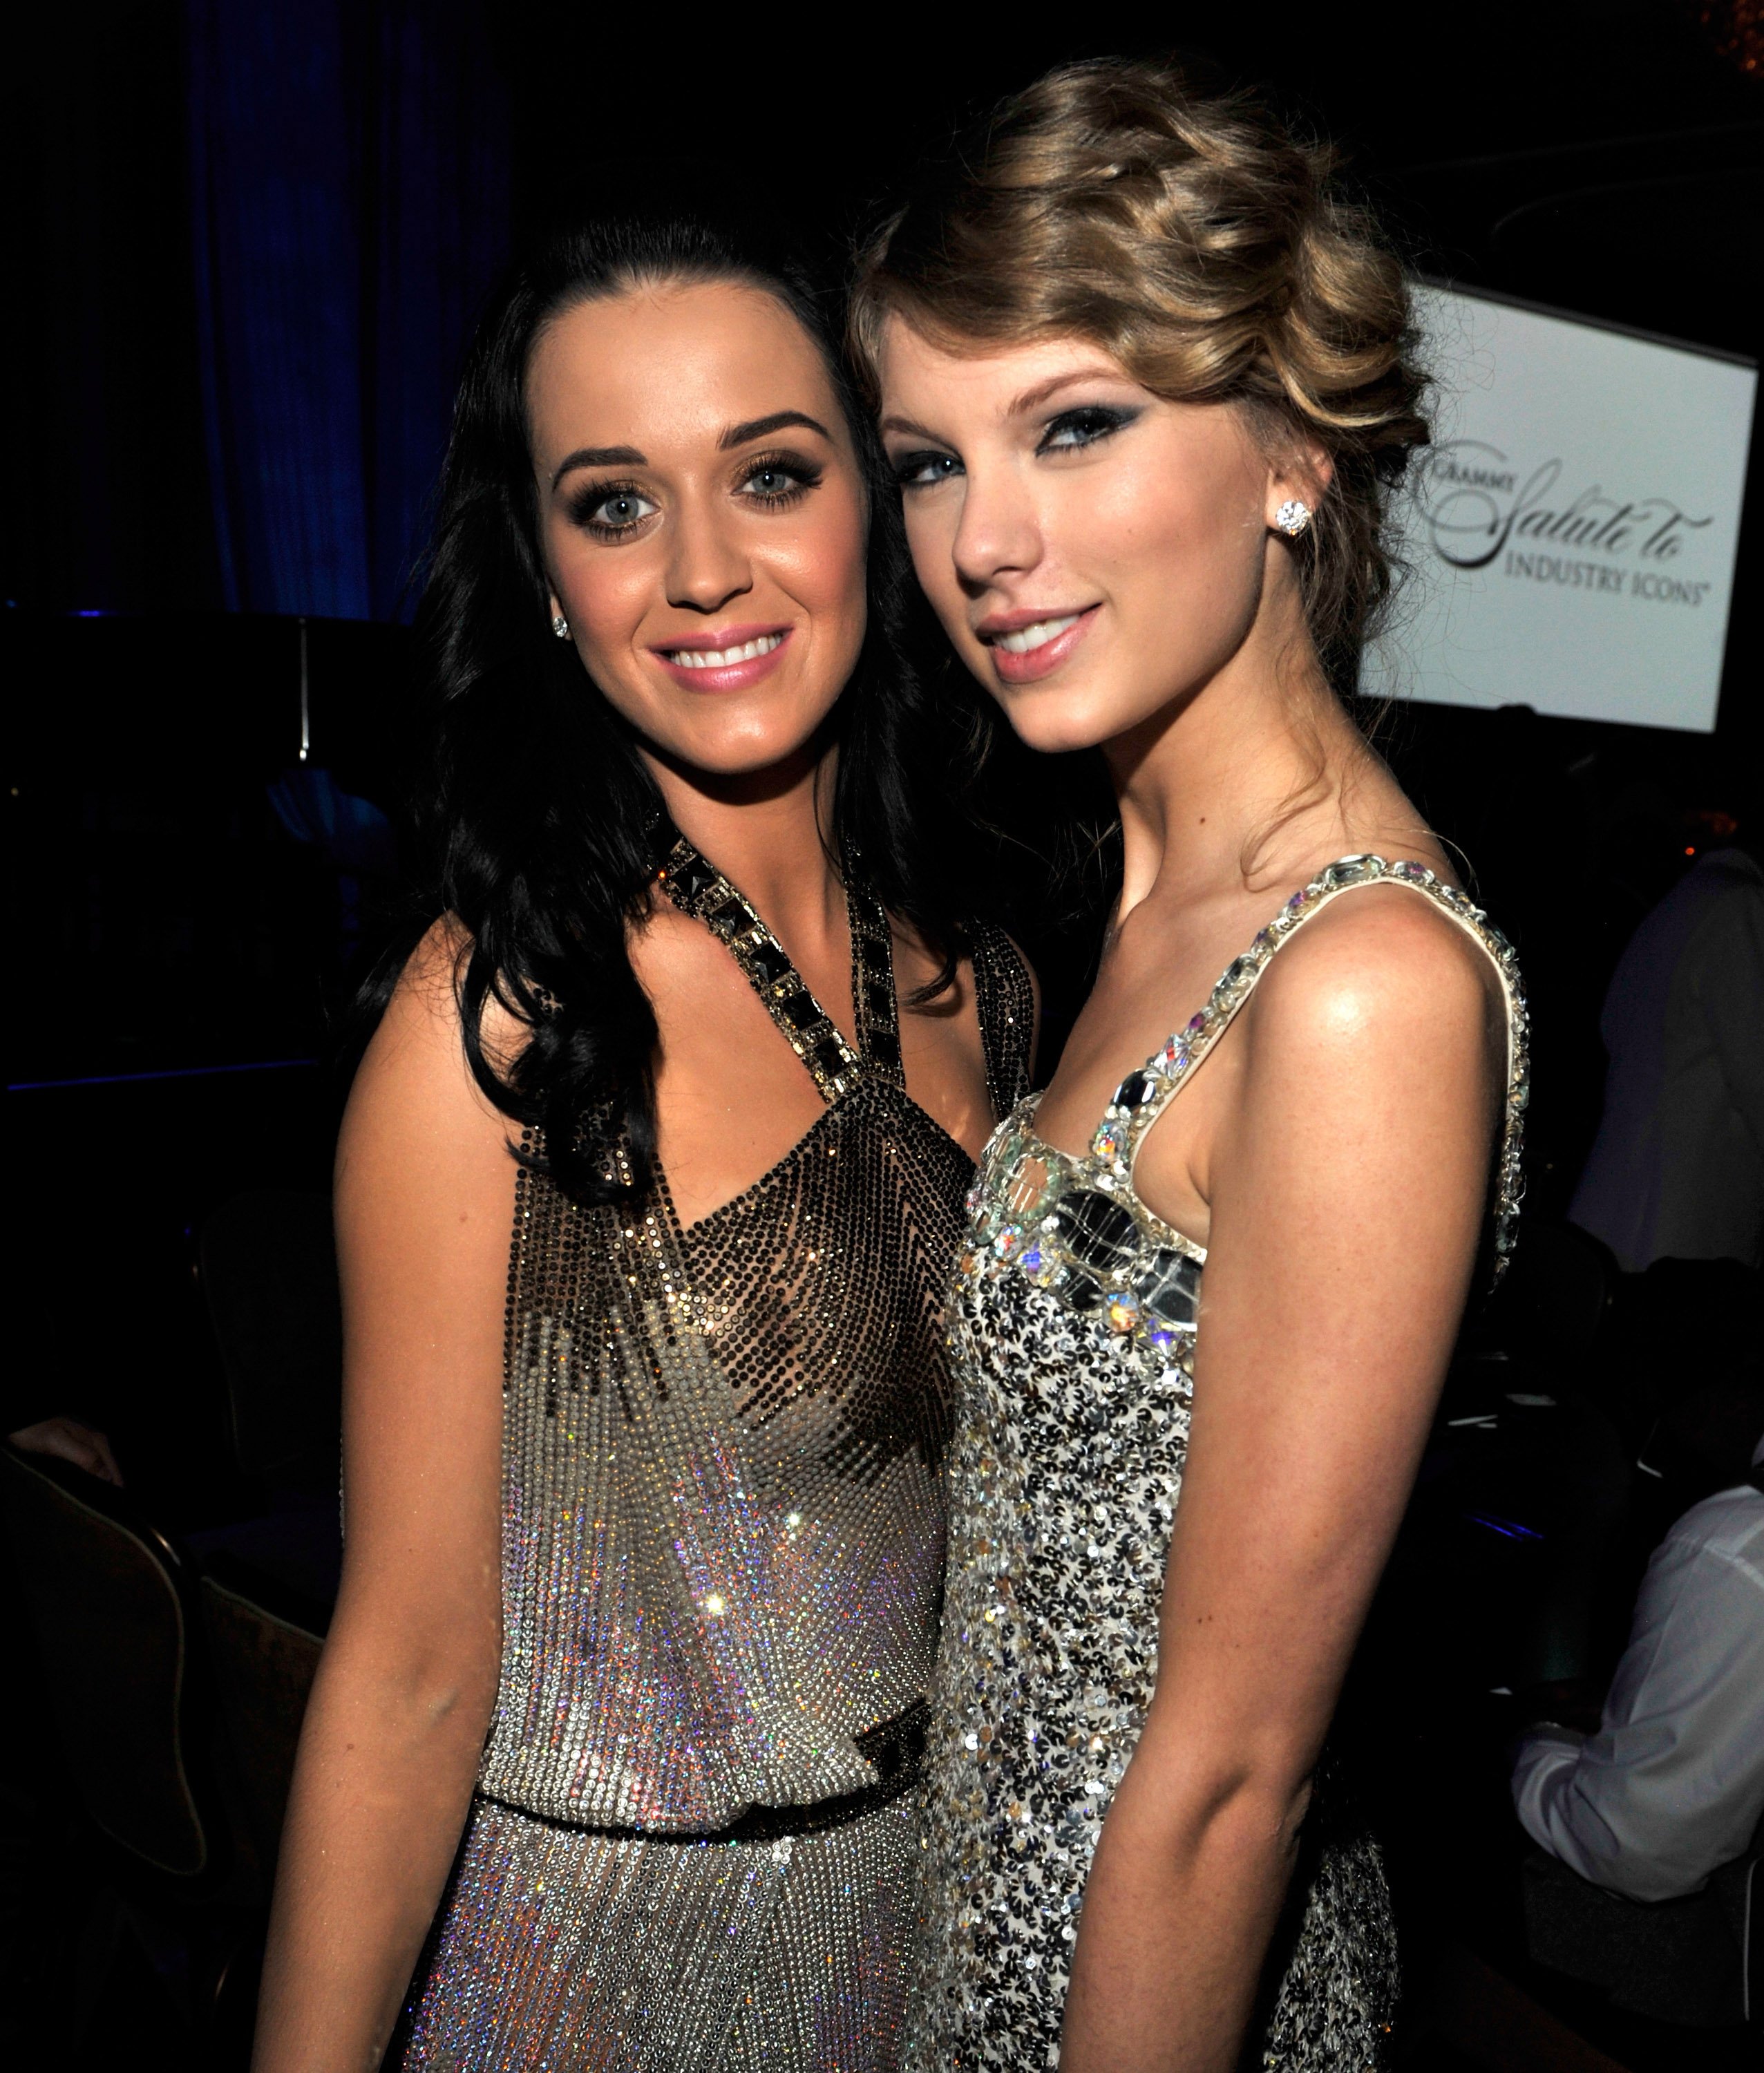 Katy Perry and Taylor Swift at the 52nd Annual GRAMMY Awards - Salute To Icons Honoring Doug Morris held at The Beverly Hilton Hotel on January 30, 2010 in Beverly Hills